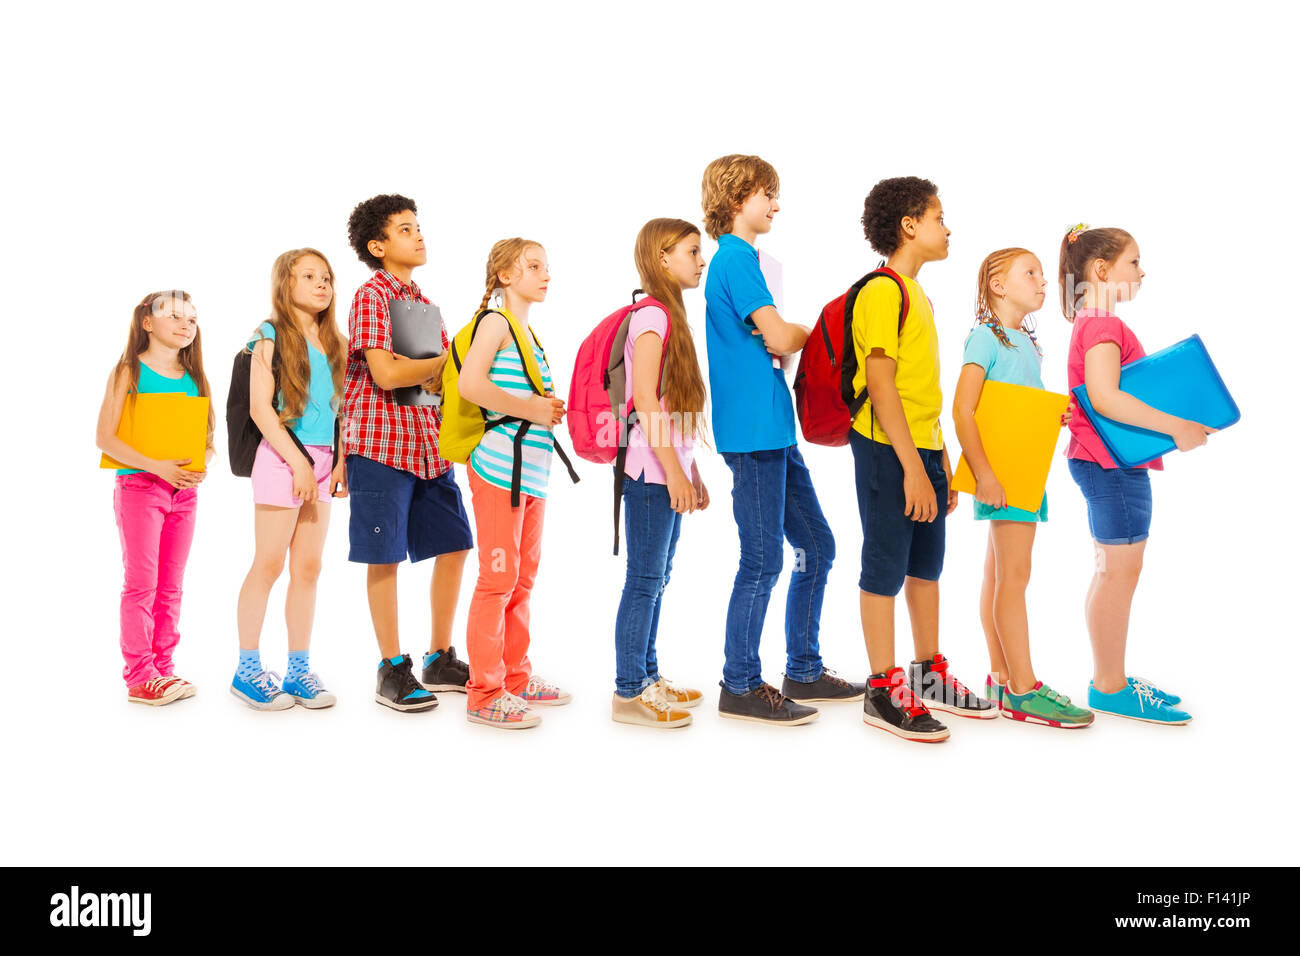 School kids with backpacks and textbooks Stock Photo